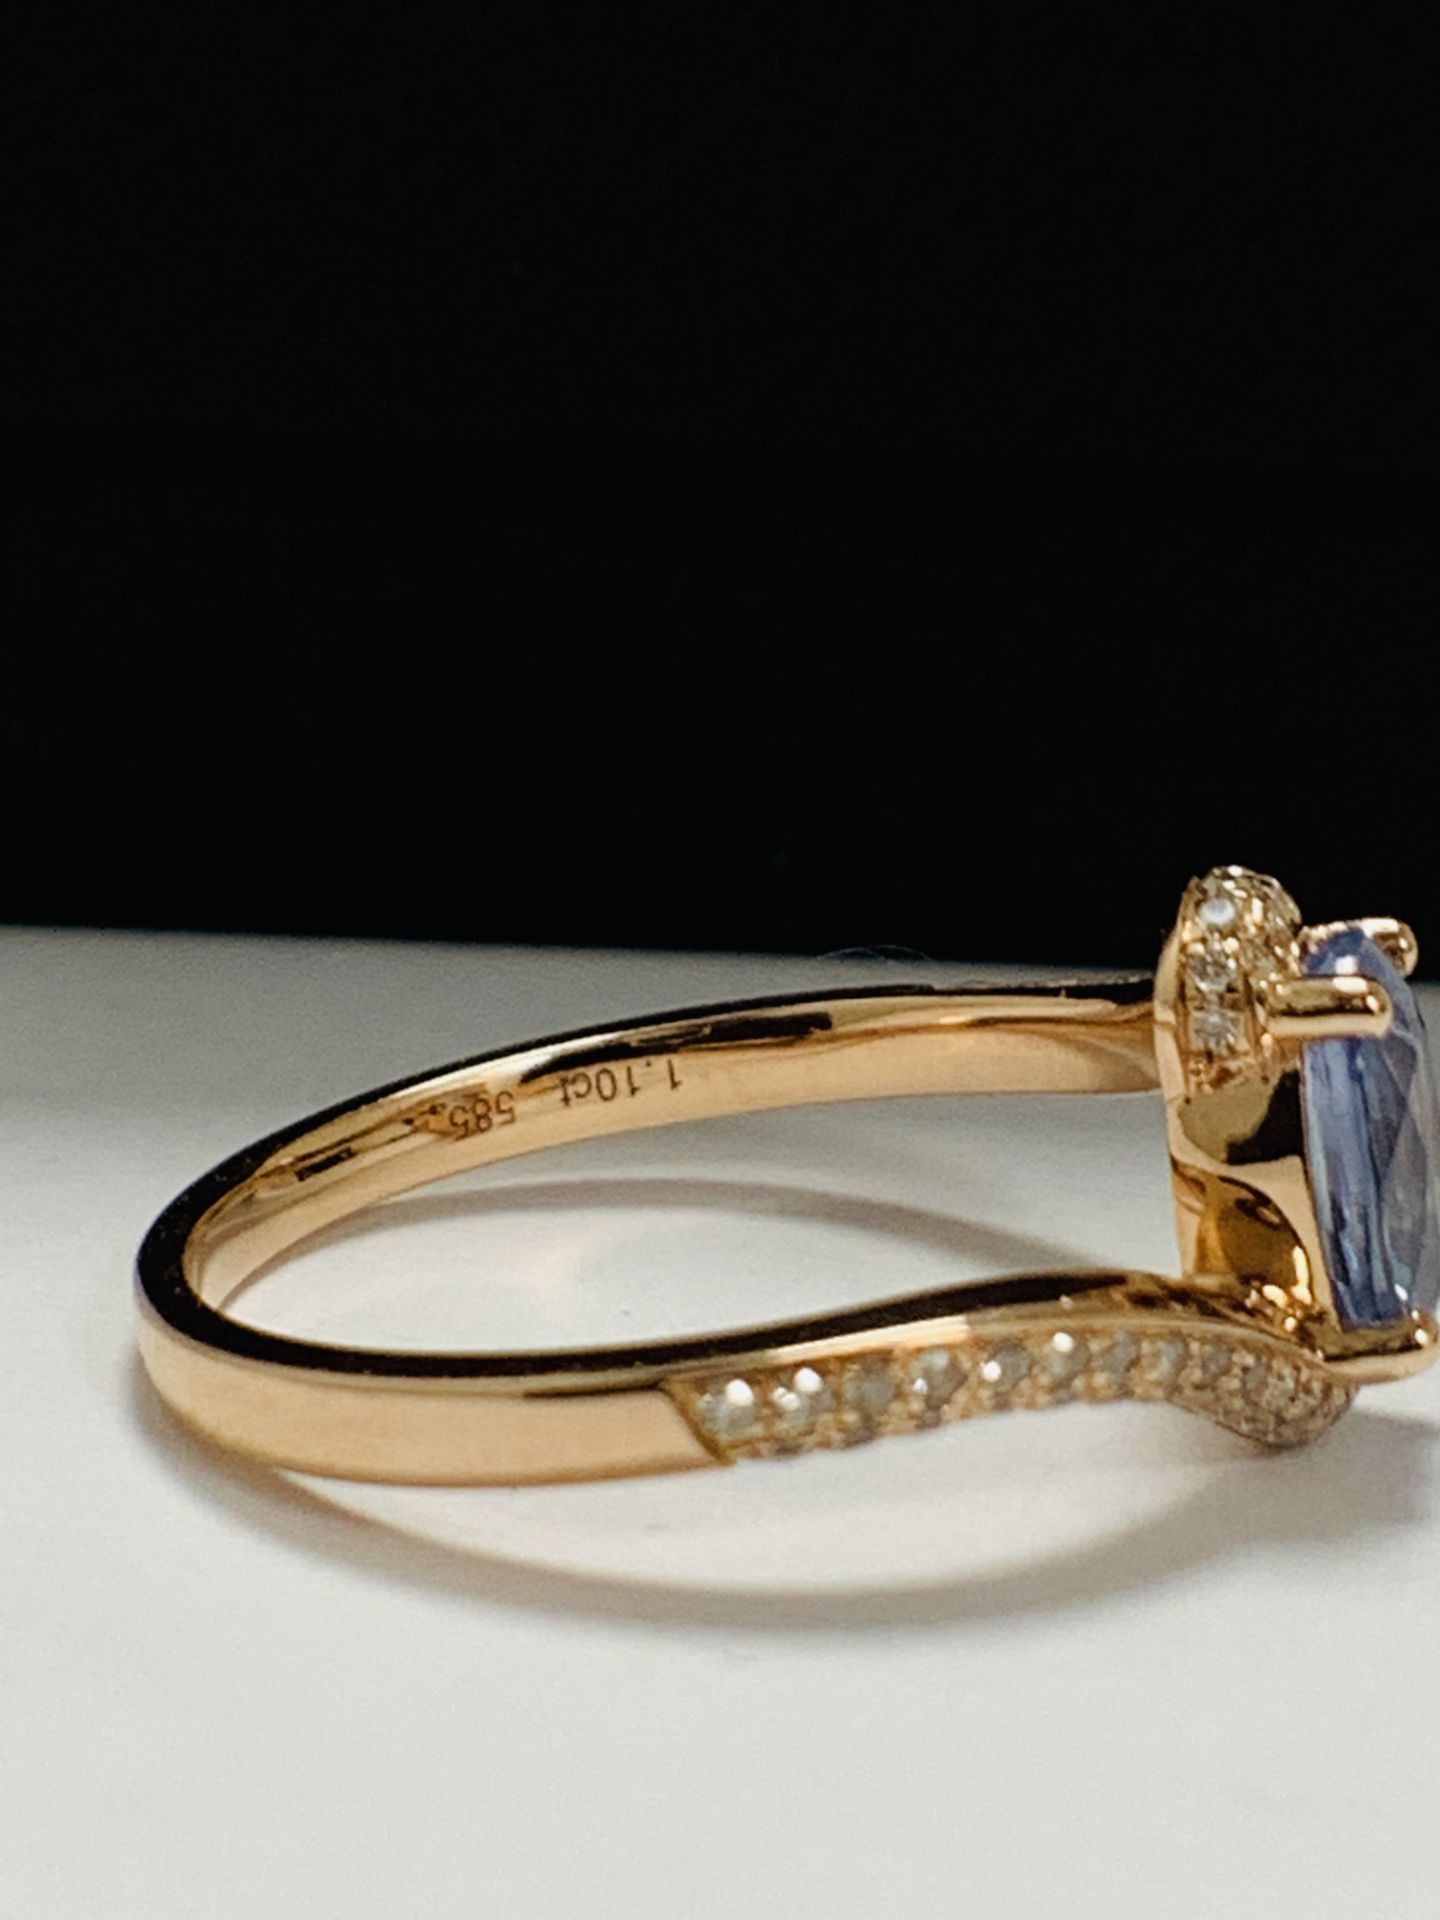 14ct Rose Gold Sapphire and Diamond Ring - Image 7 of 13